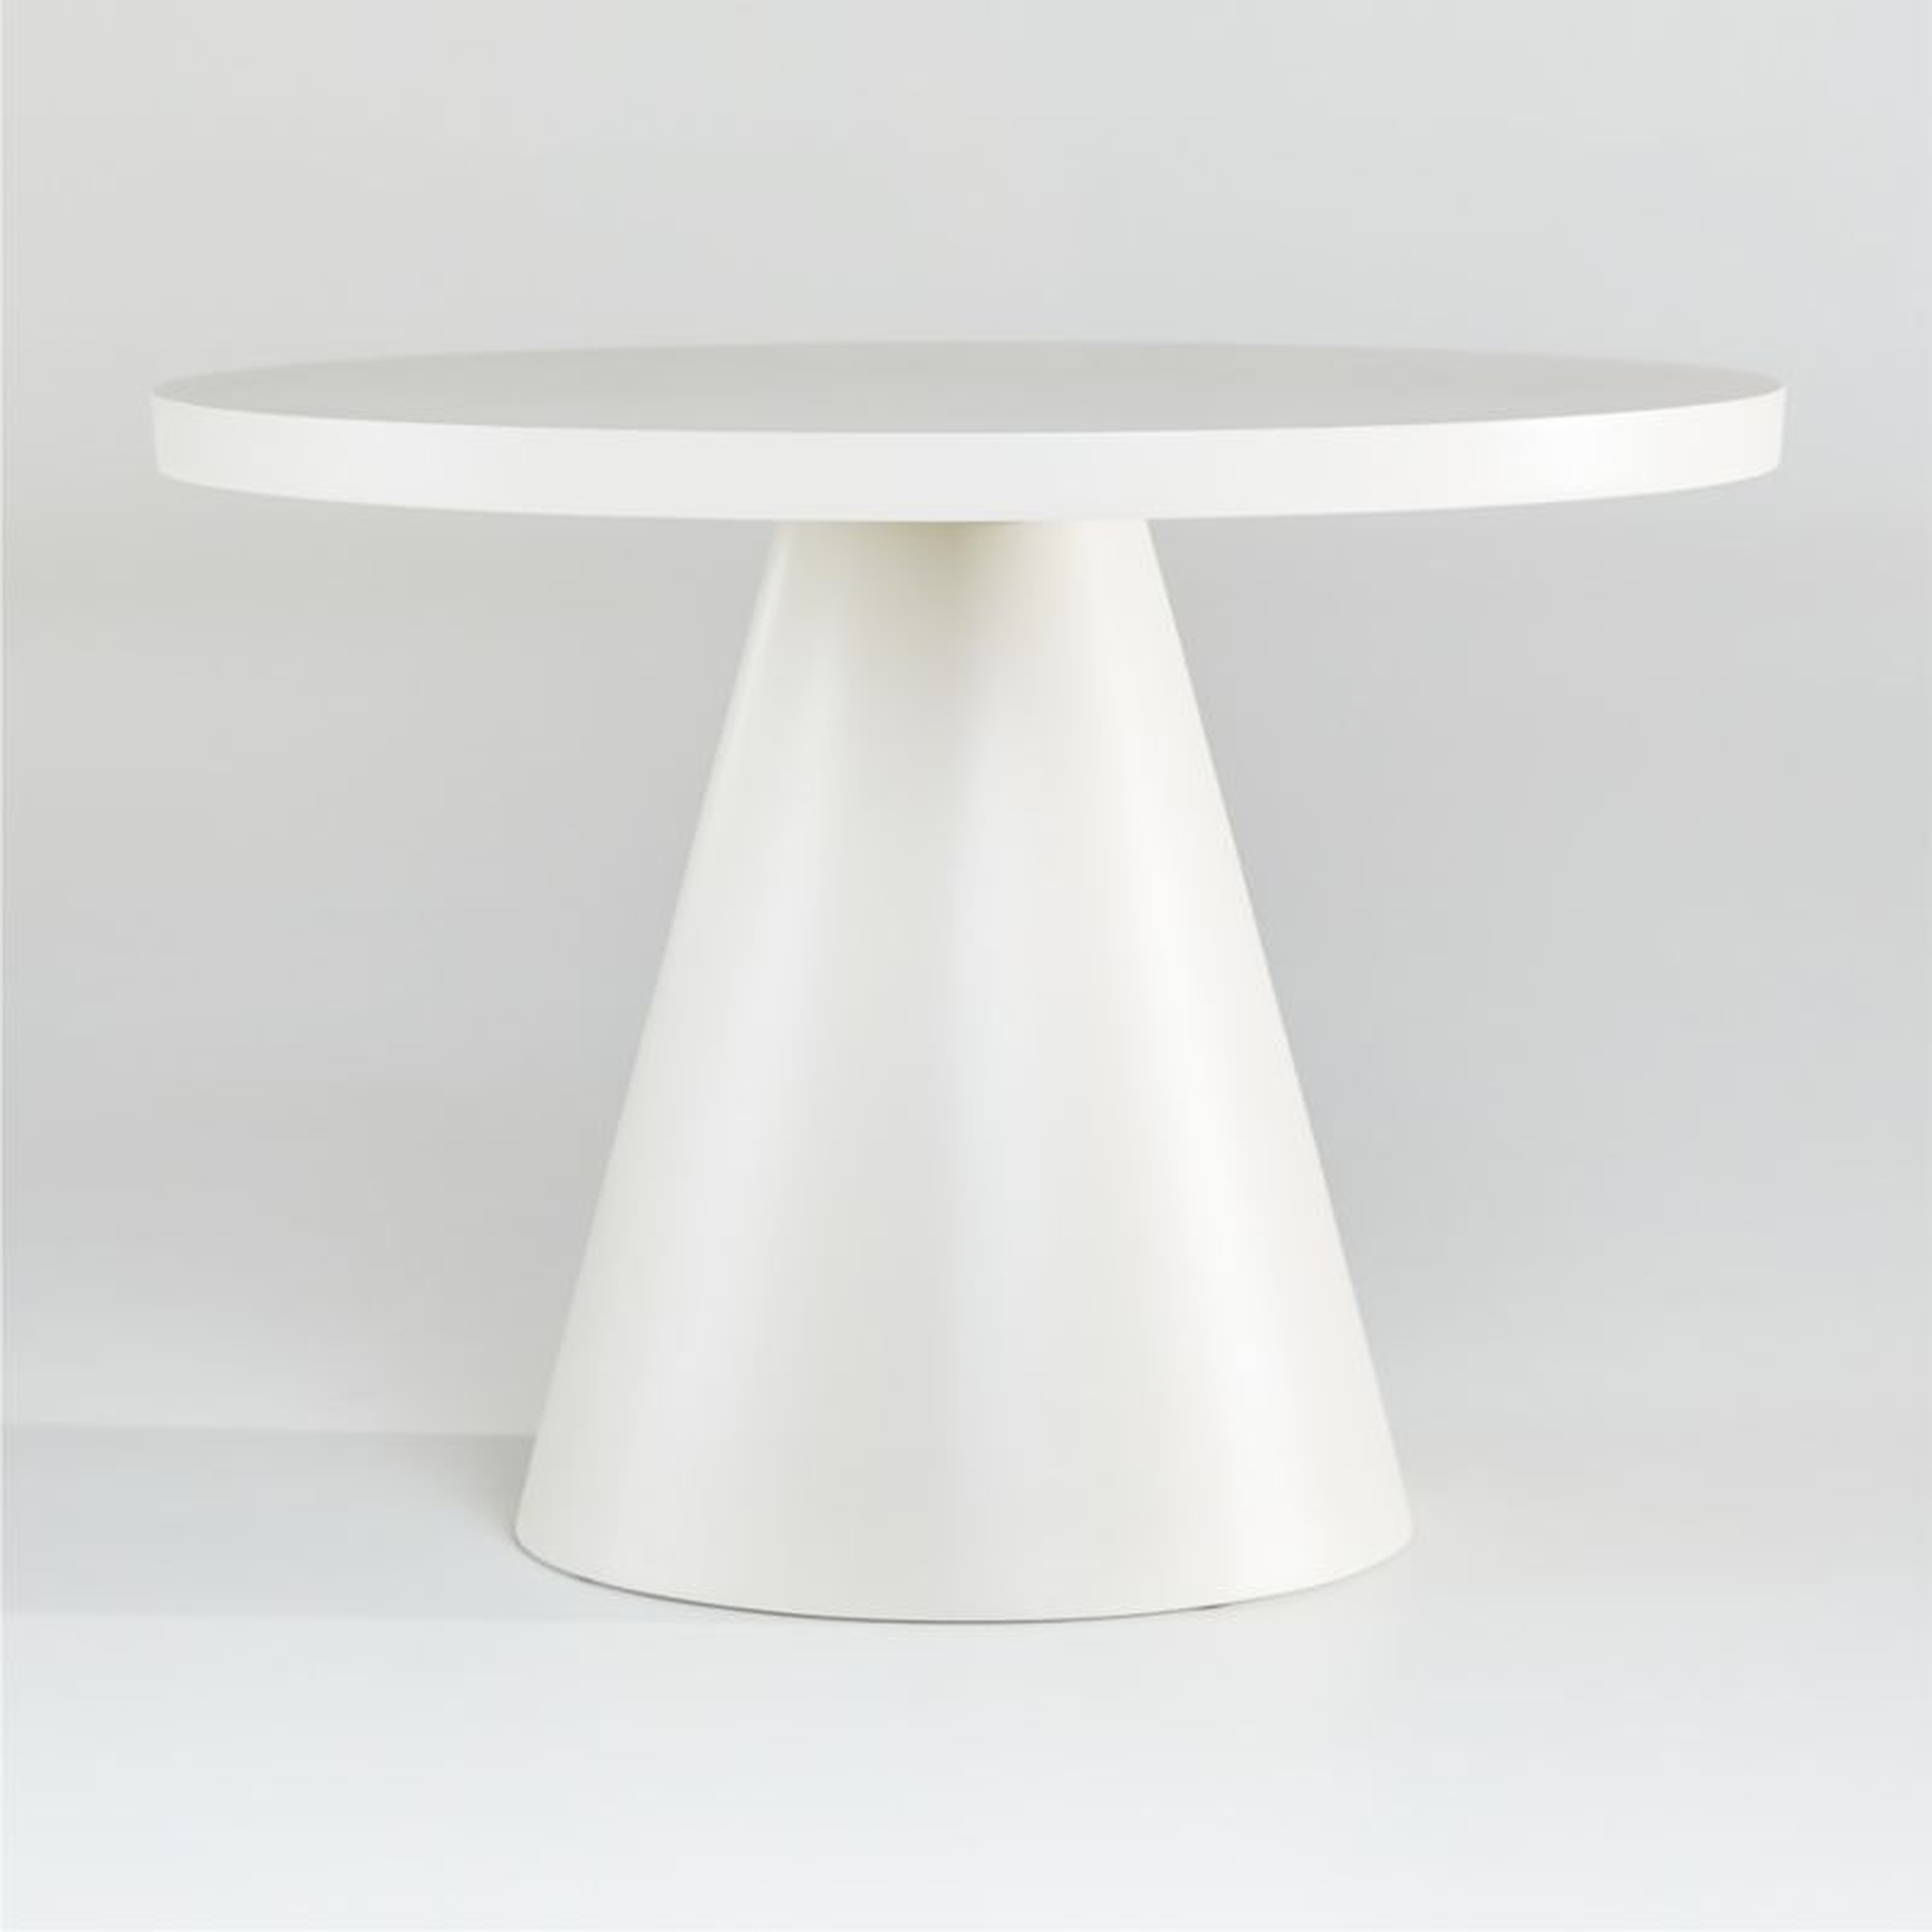 Willy Round Kids Play Table by Leanne Ford - Crate and Barrel